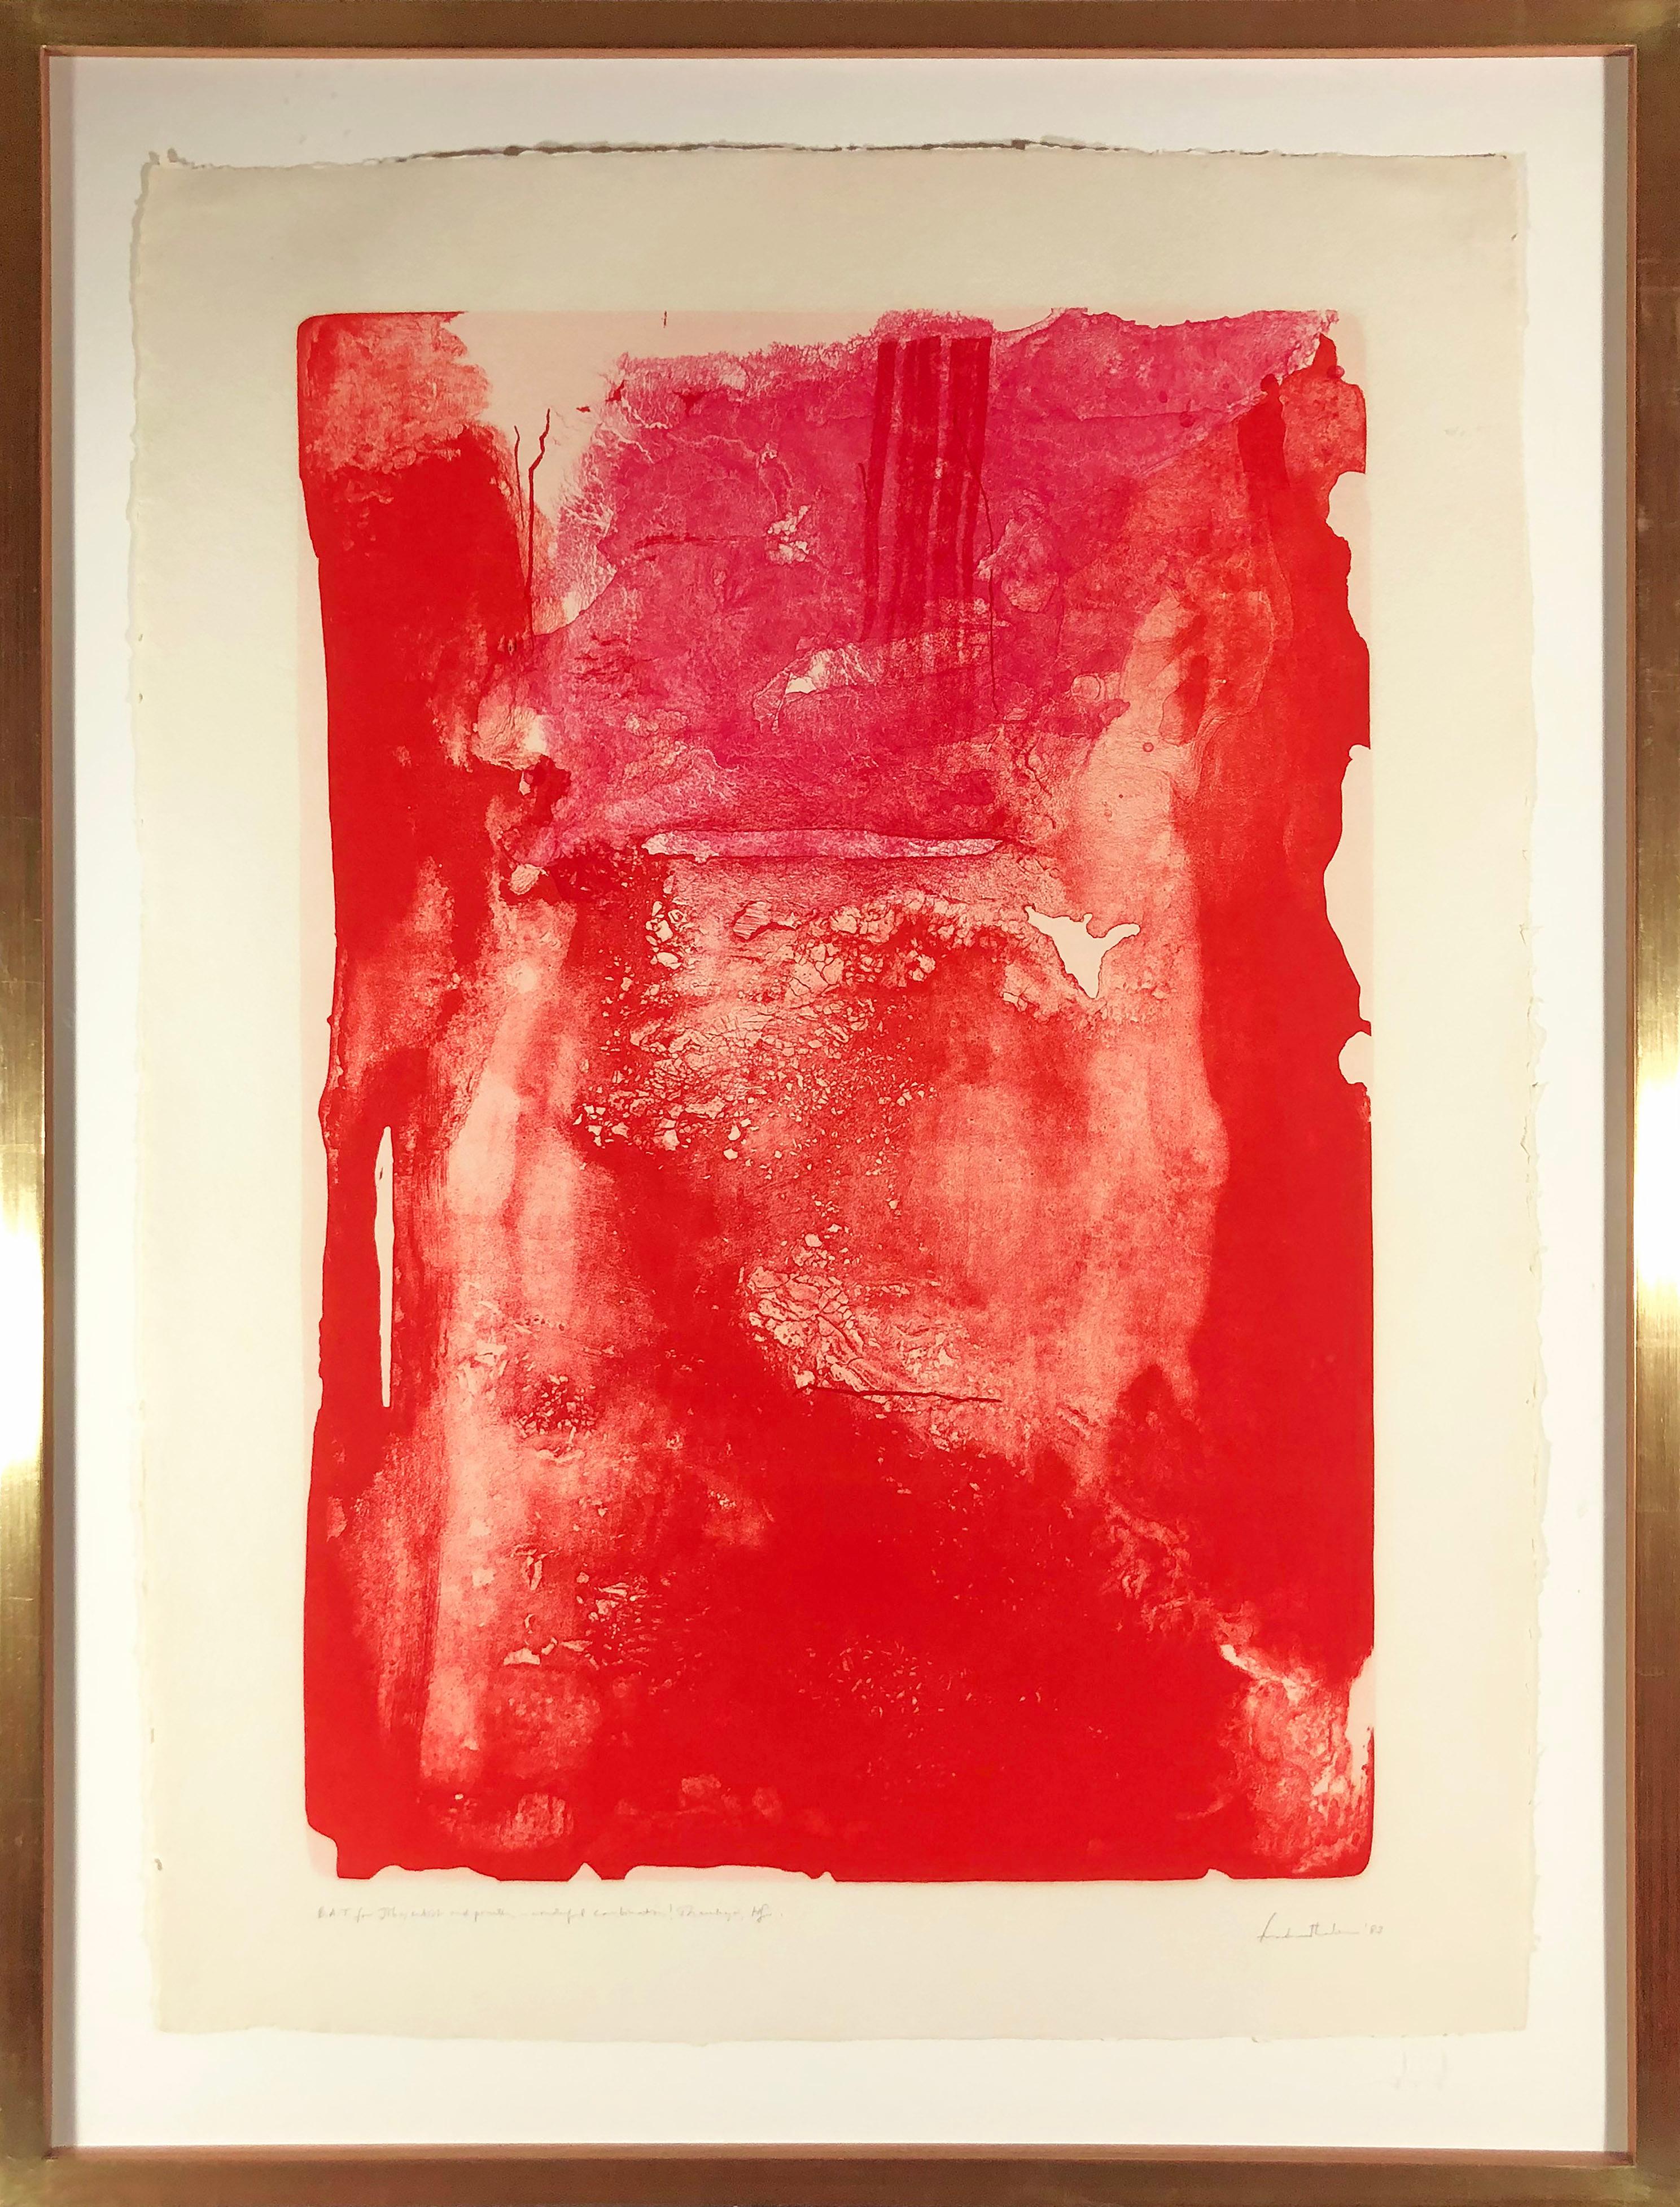 Divertimento - Abstract Expressionist Print by Helen Frankenthaler